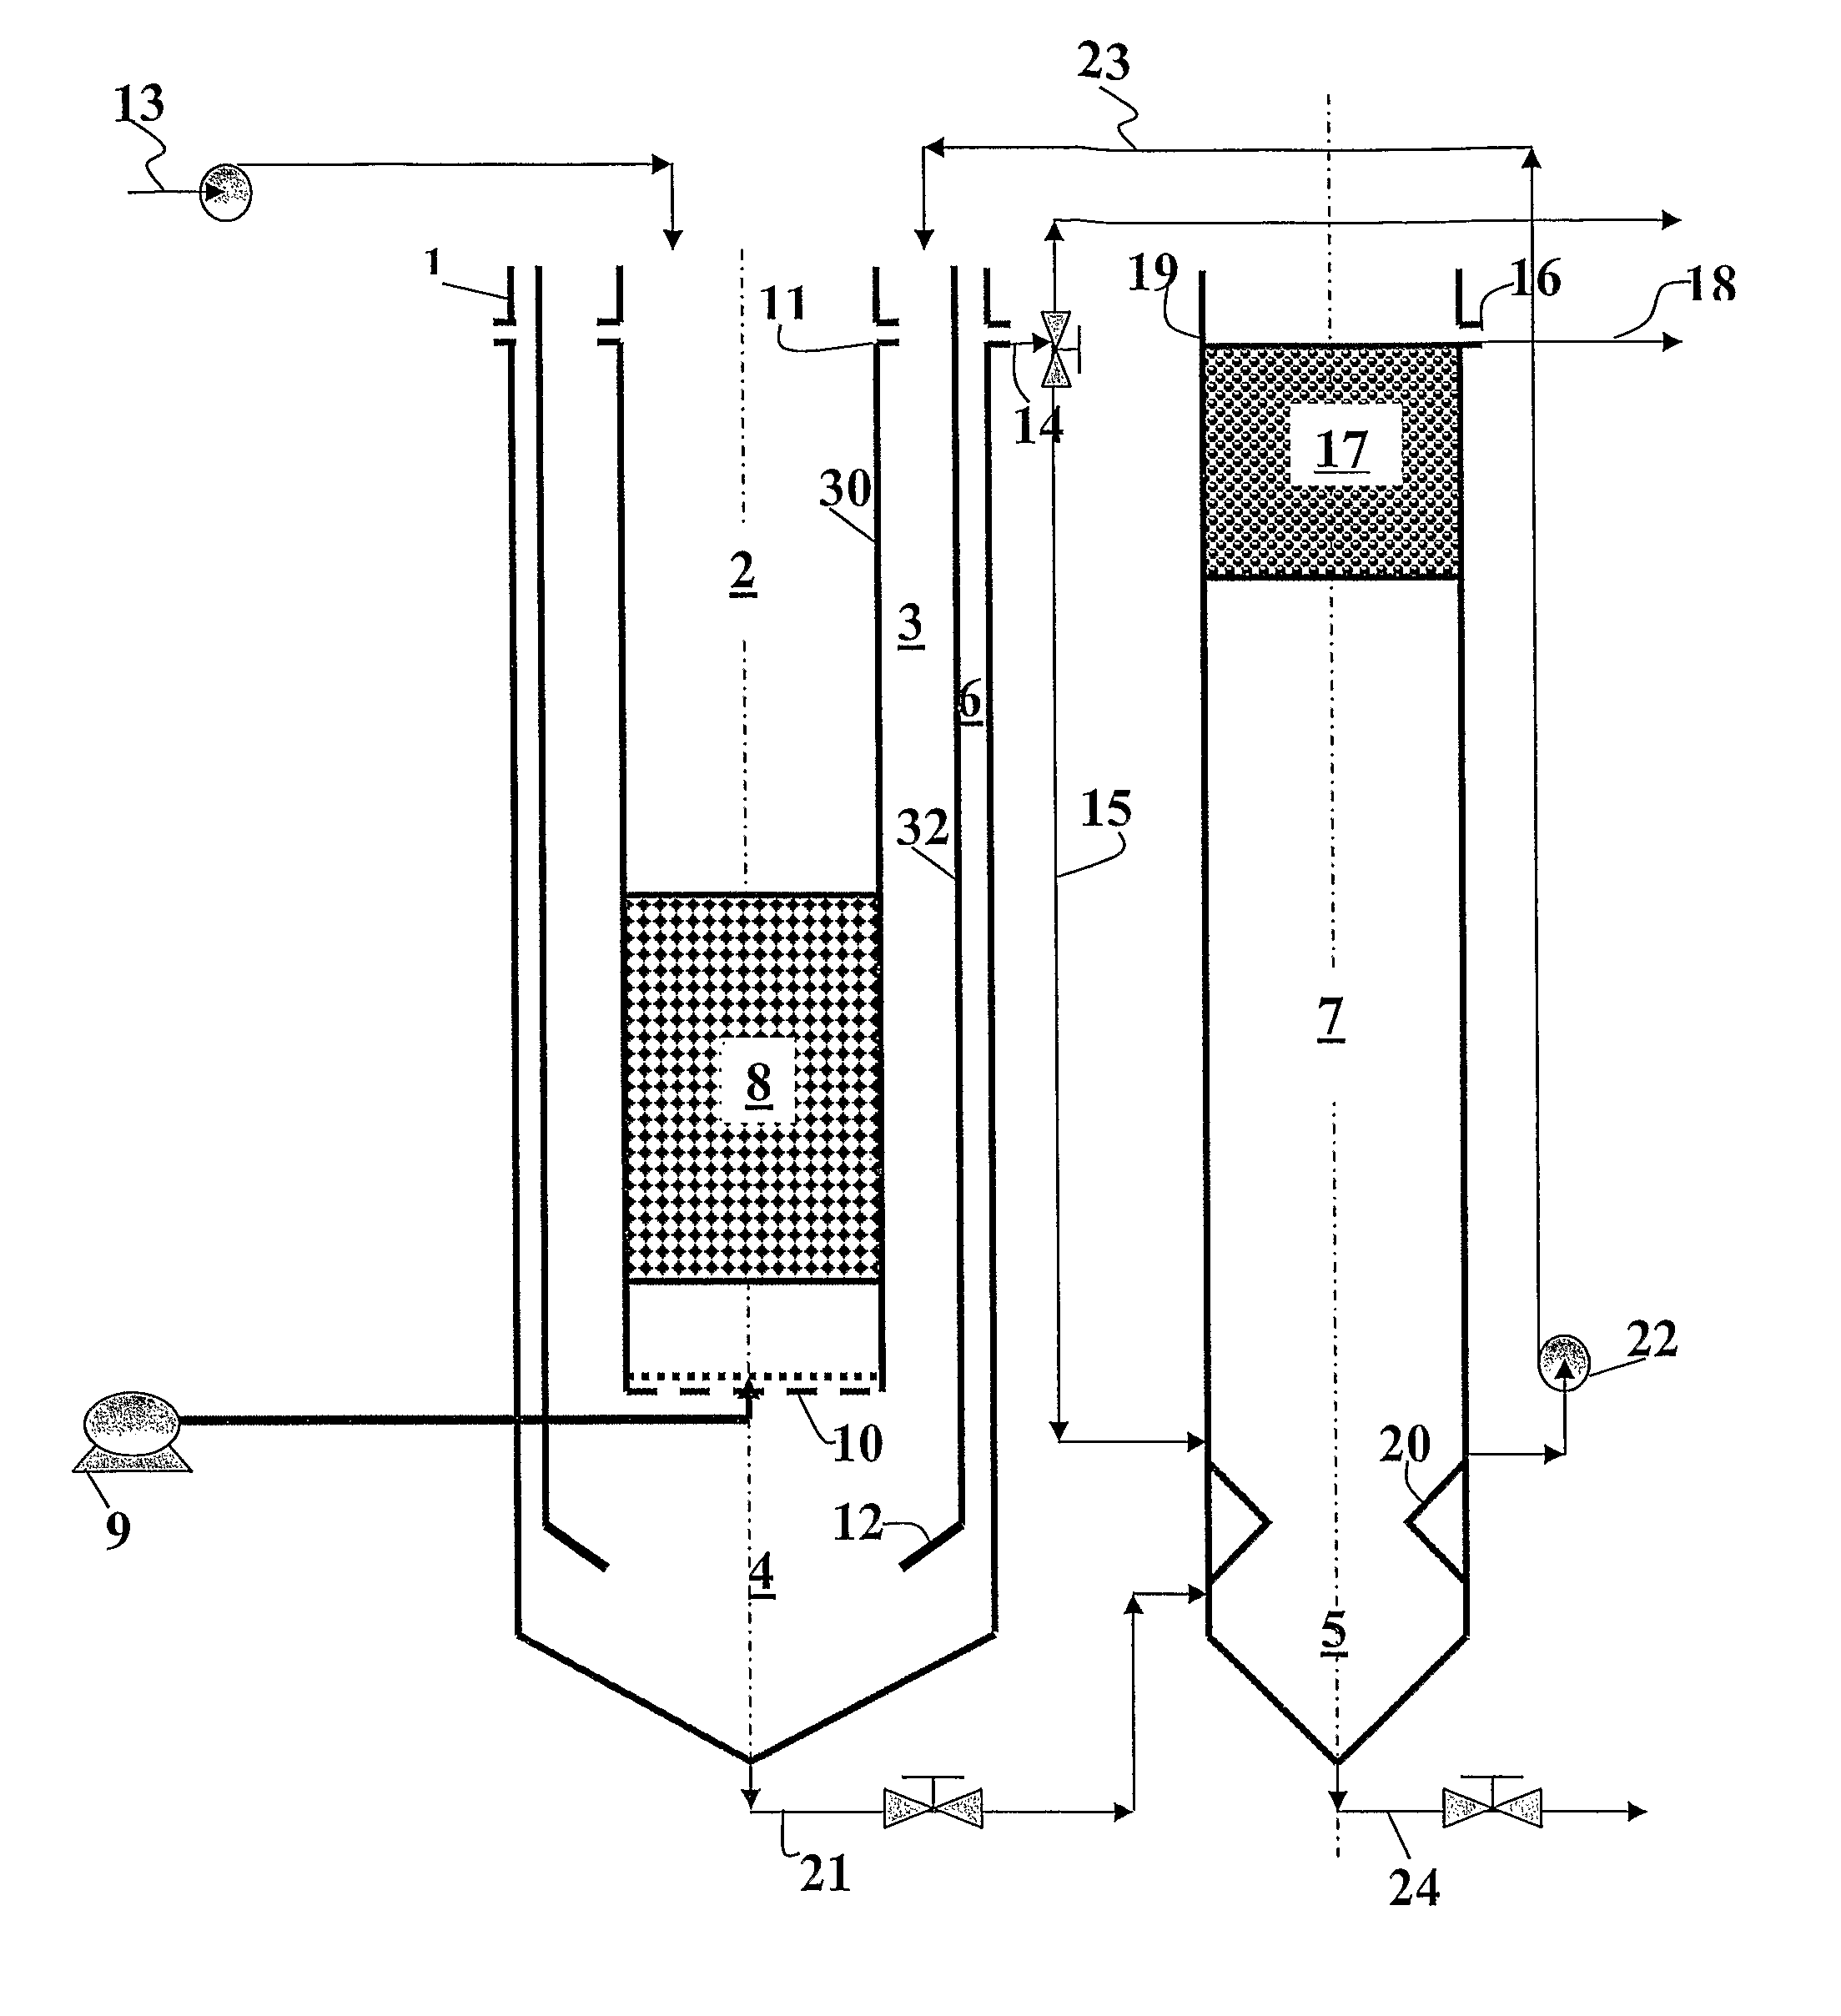 Integrated multi-zone wastewater treatment system and method